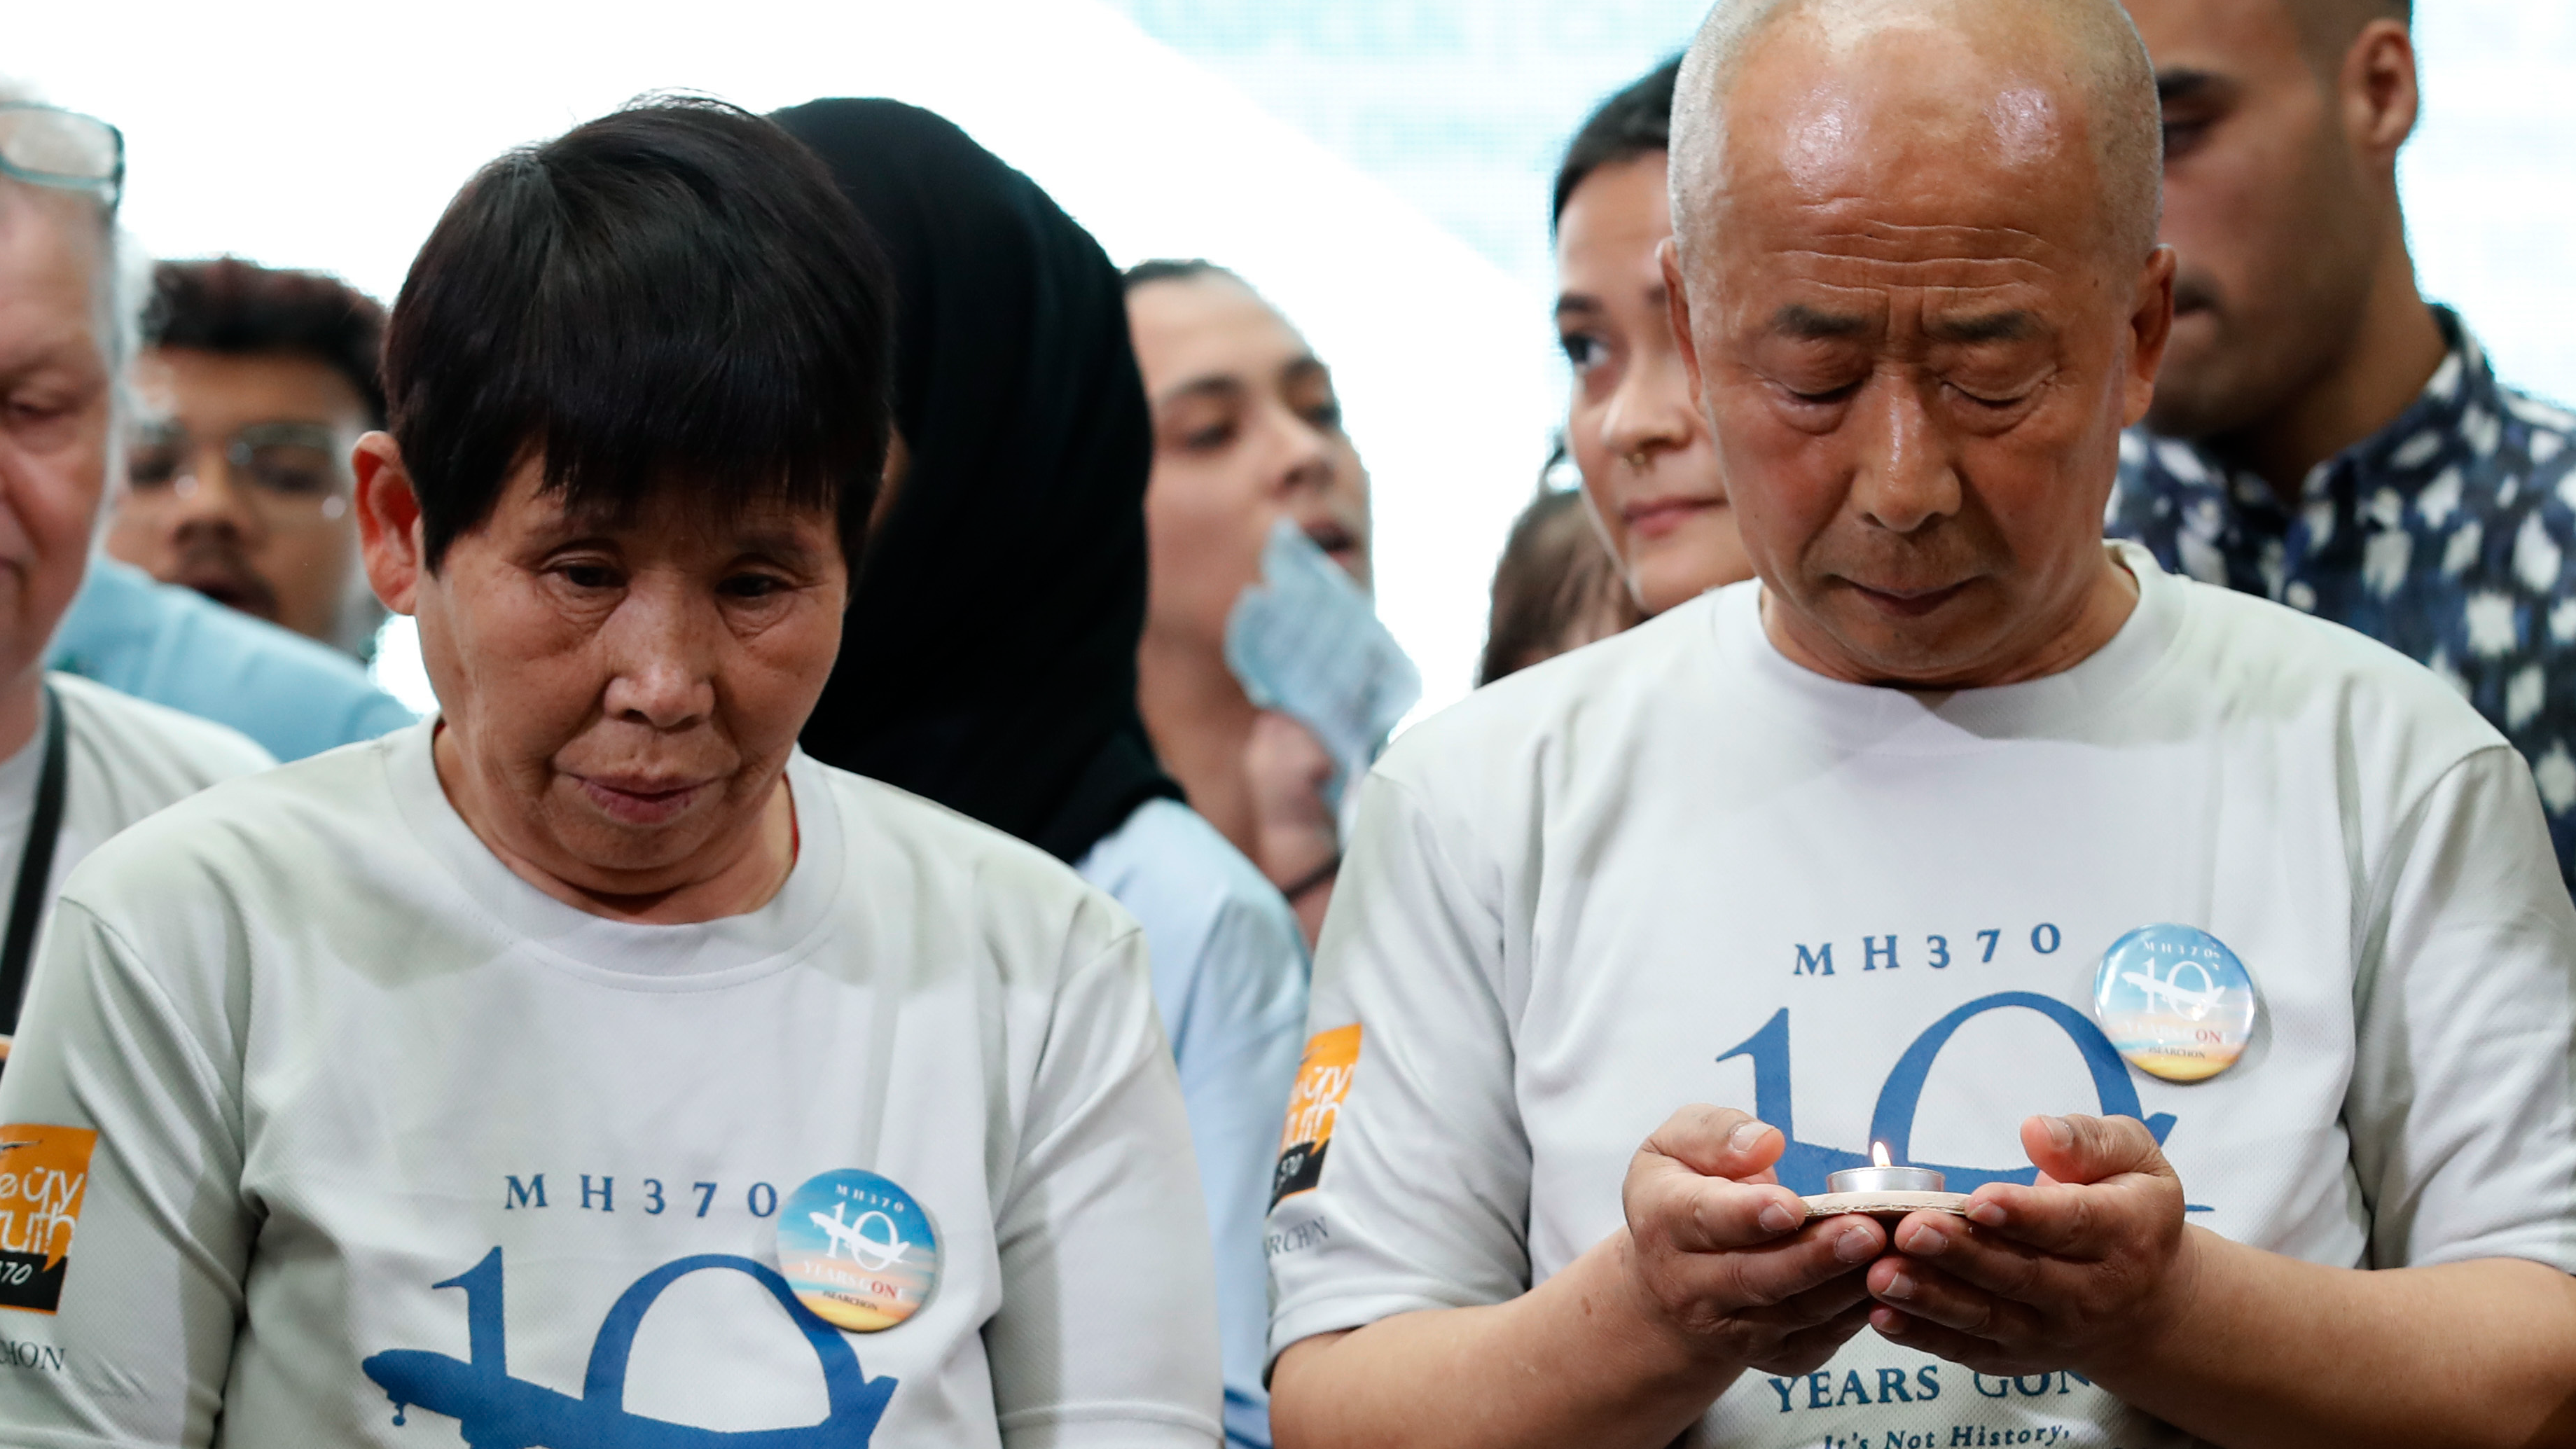 Family members of MH-370 passengers stand for a moment of silence at a memorial event in Kuala Lumpur on March 3. /FL Wong/AP